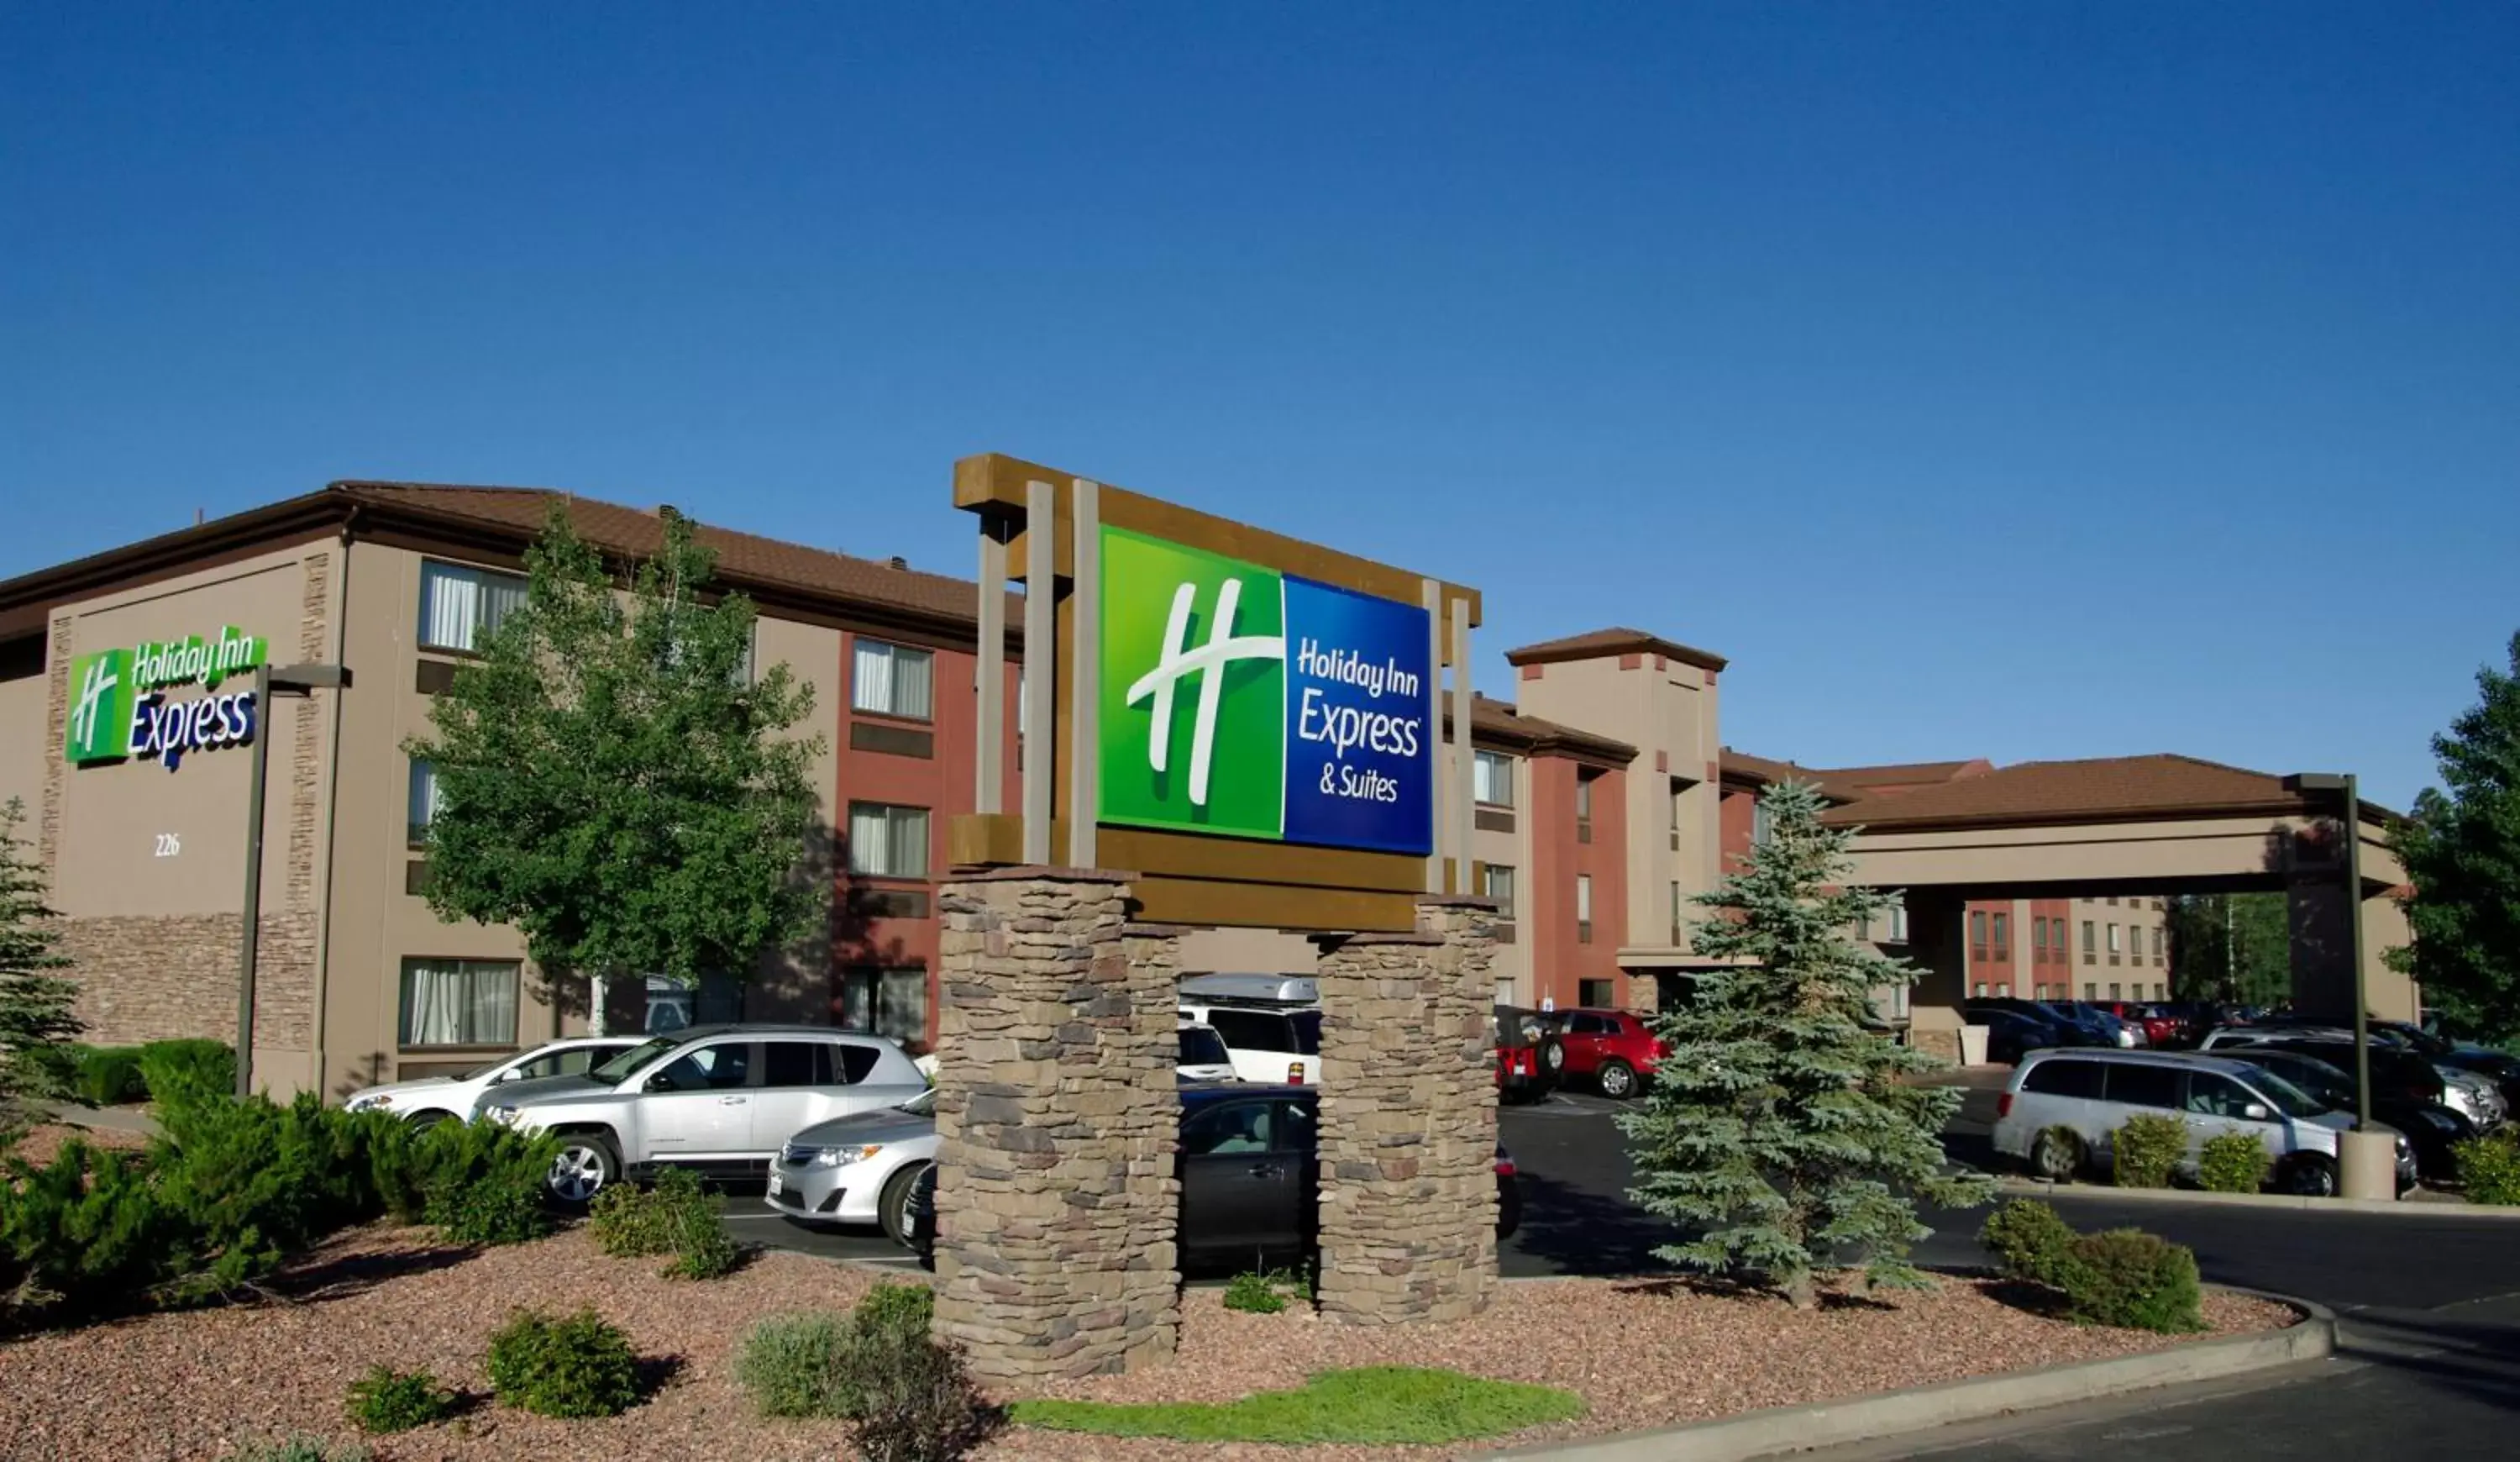 Property building in Holiday Inn Express Grand Canyon, an IHG Hotel